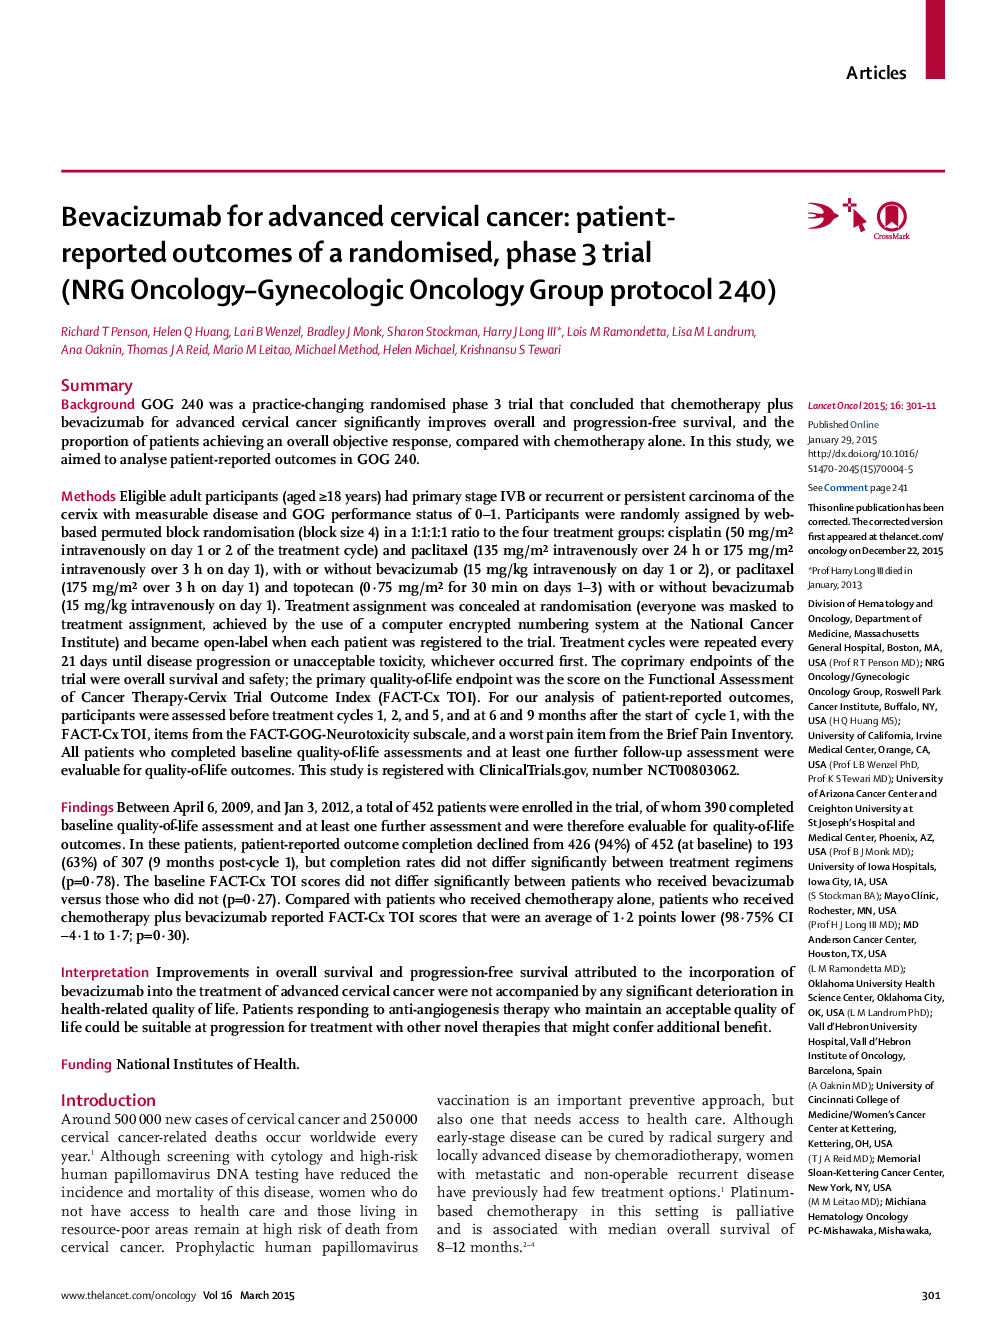 Bevacizumab for advanced cervical cancer: patient-reported outcomes of a randomised, phase 3 trial (NRG Oncology–Gynecologic Oncology Group protocol 240)